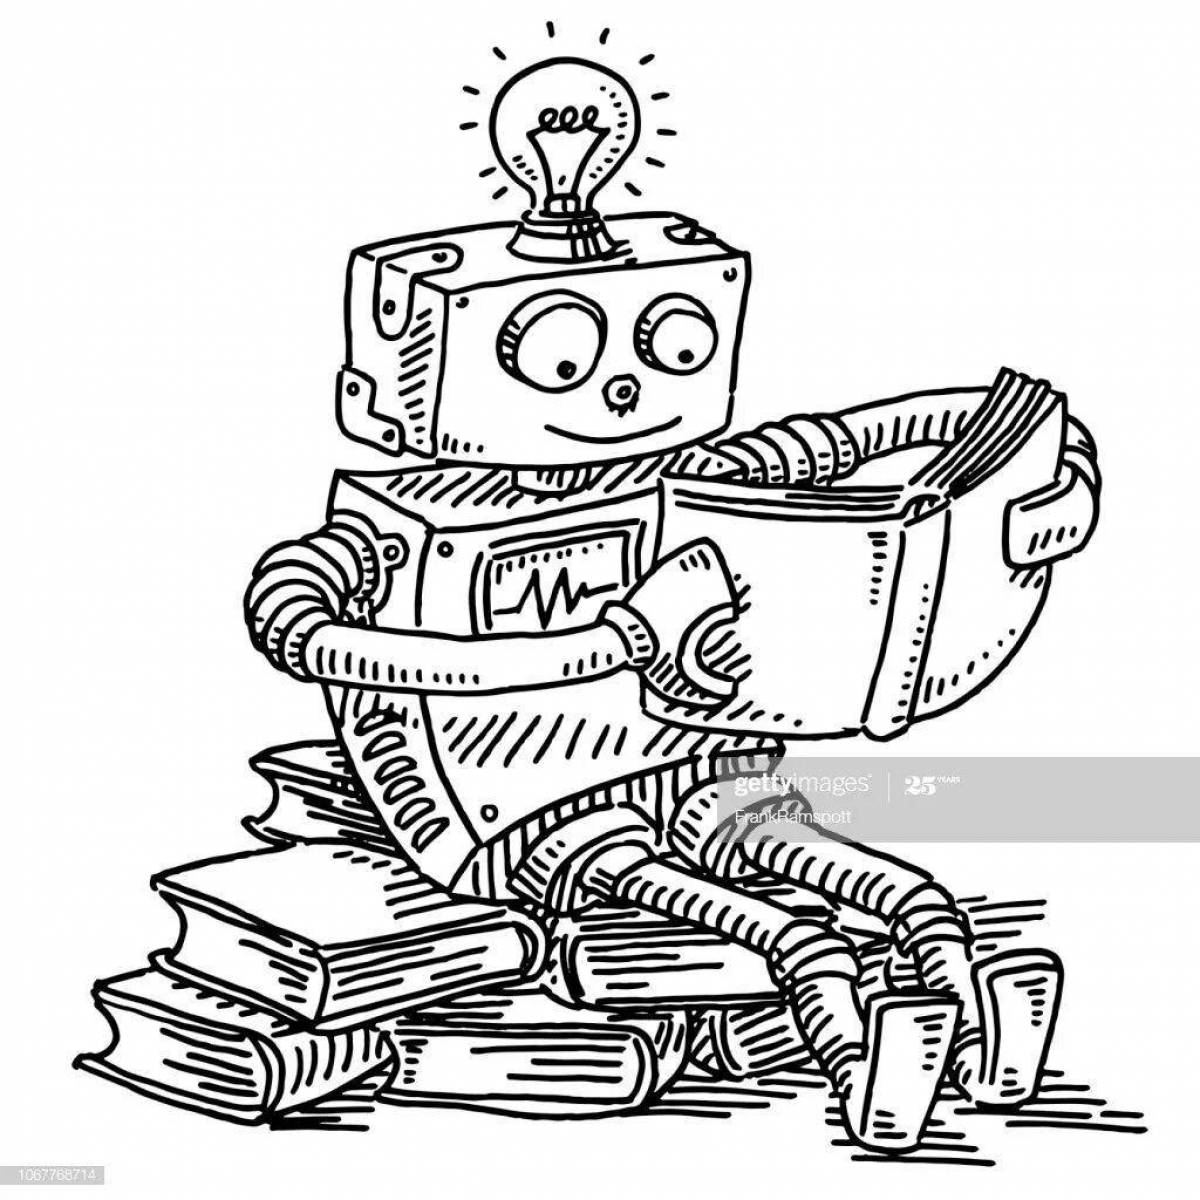 Interesting robot teacher coloring page